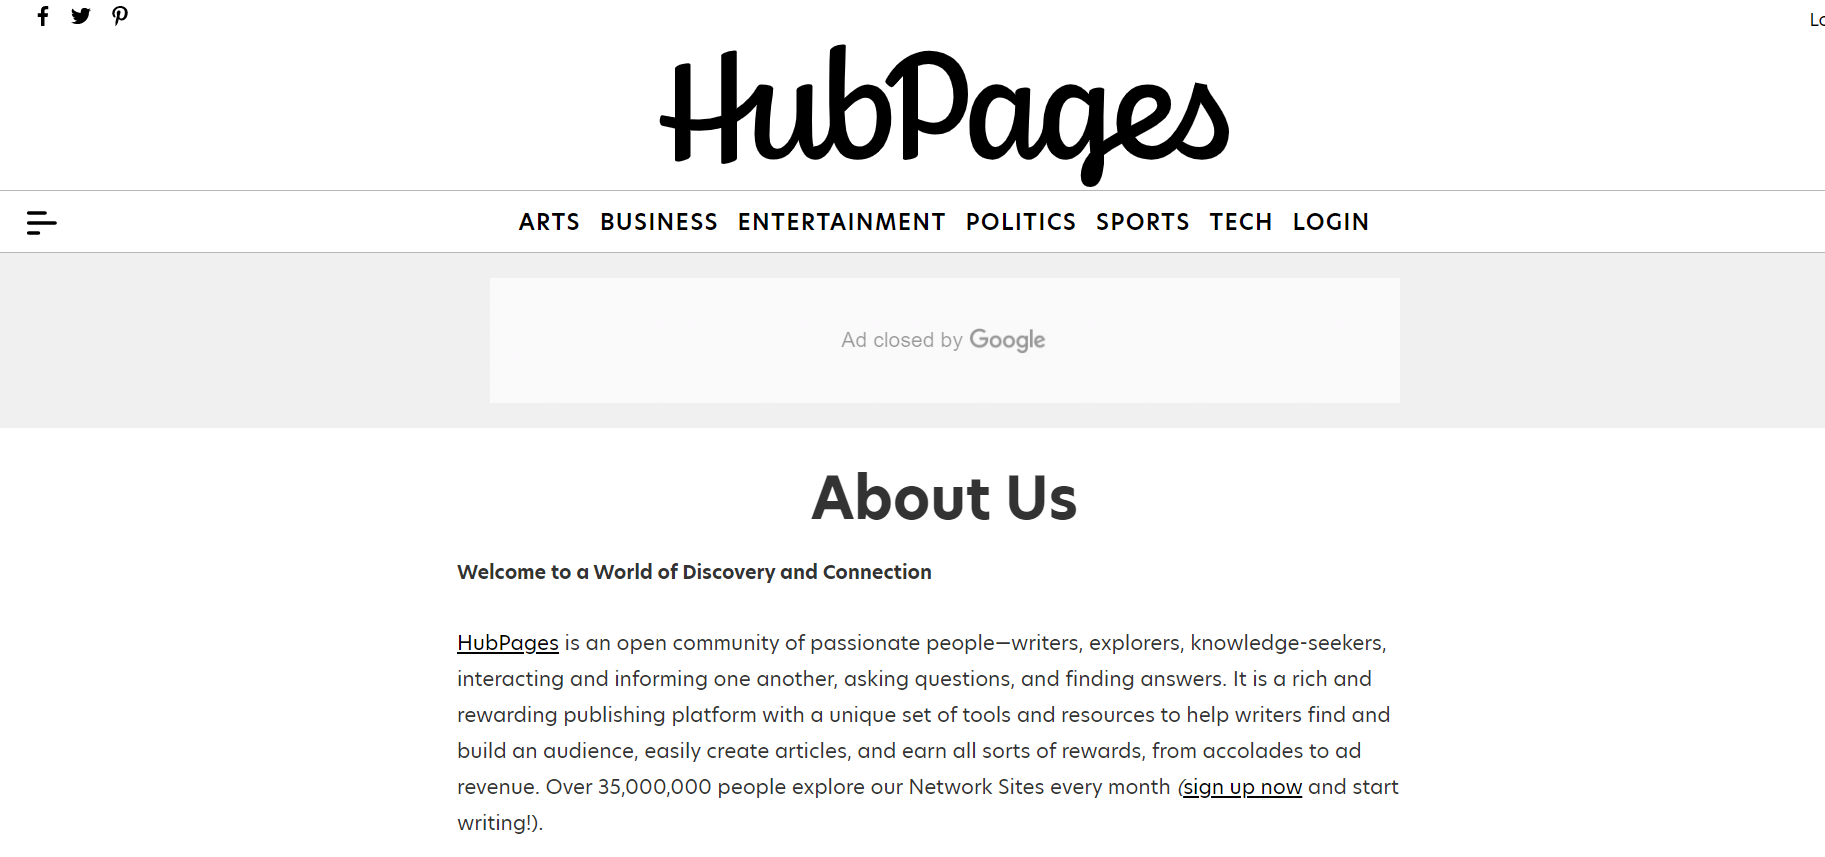 HubPages About Us webpage